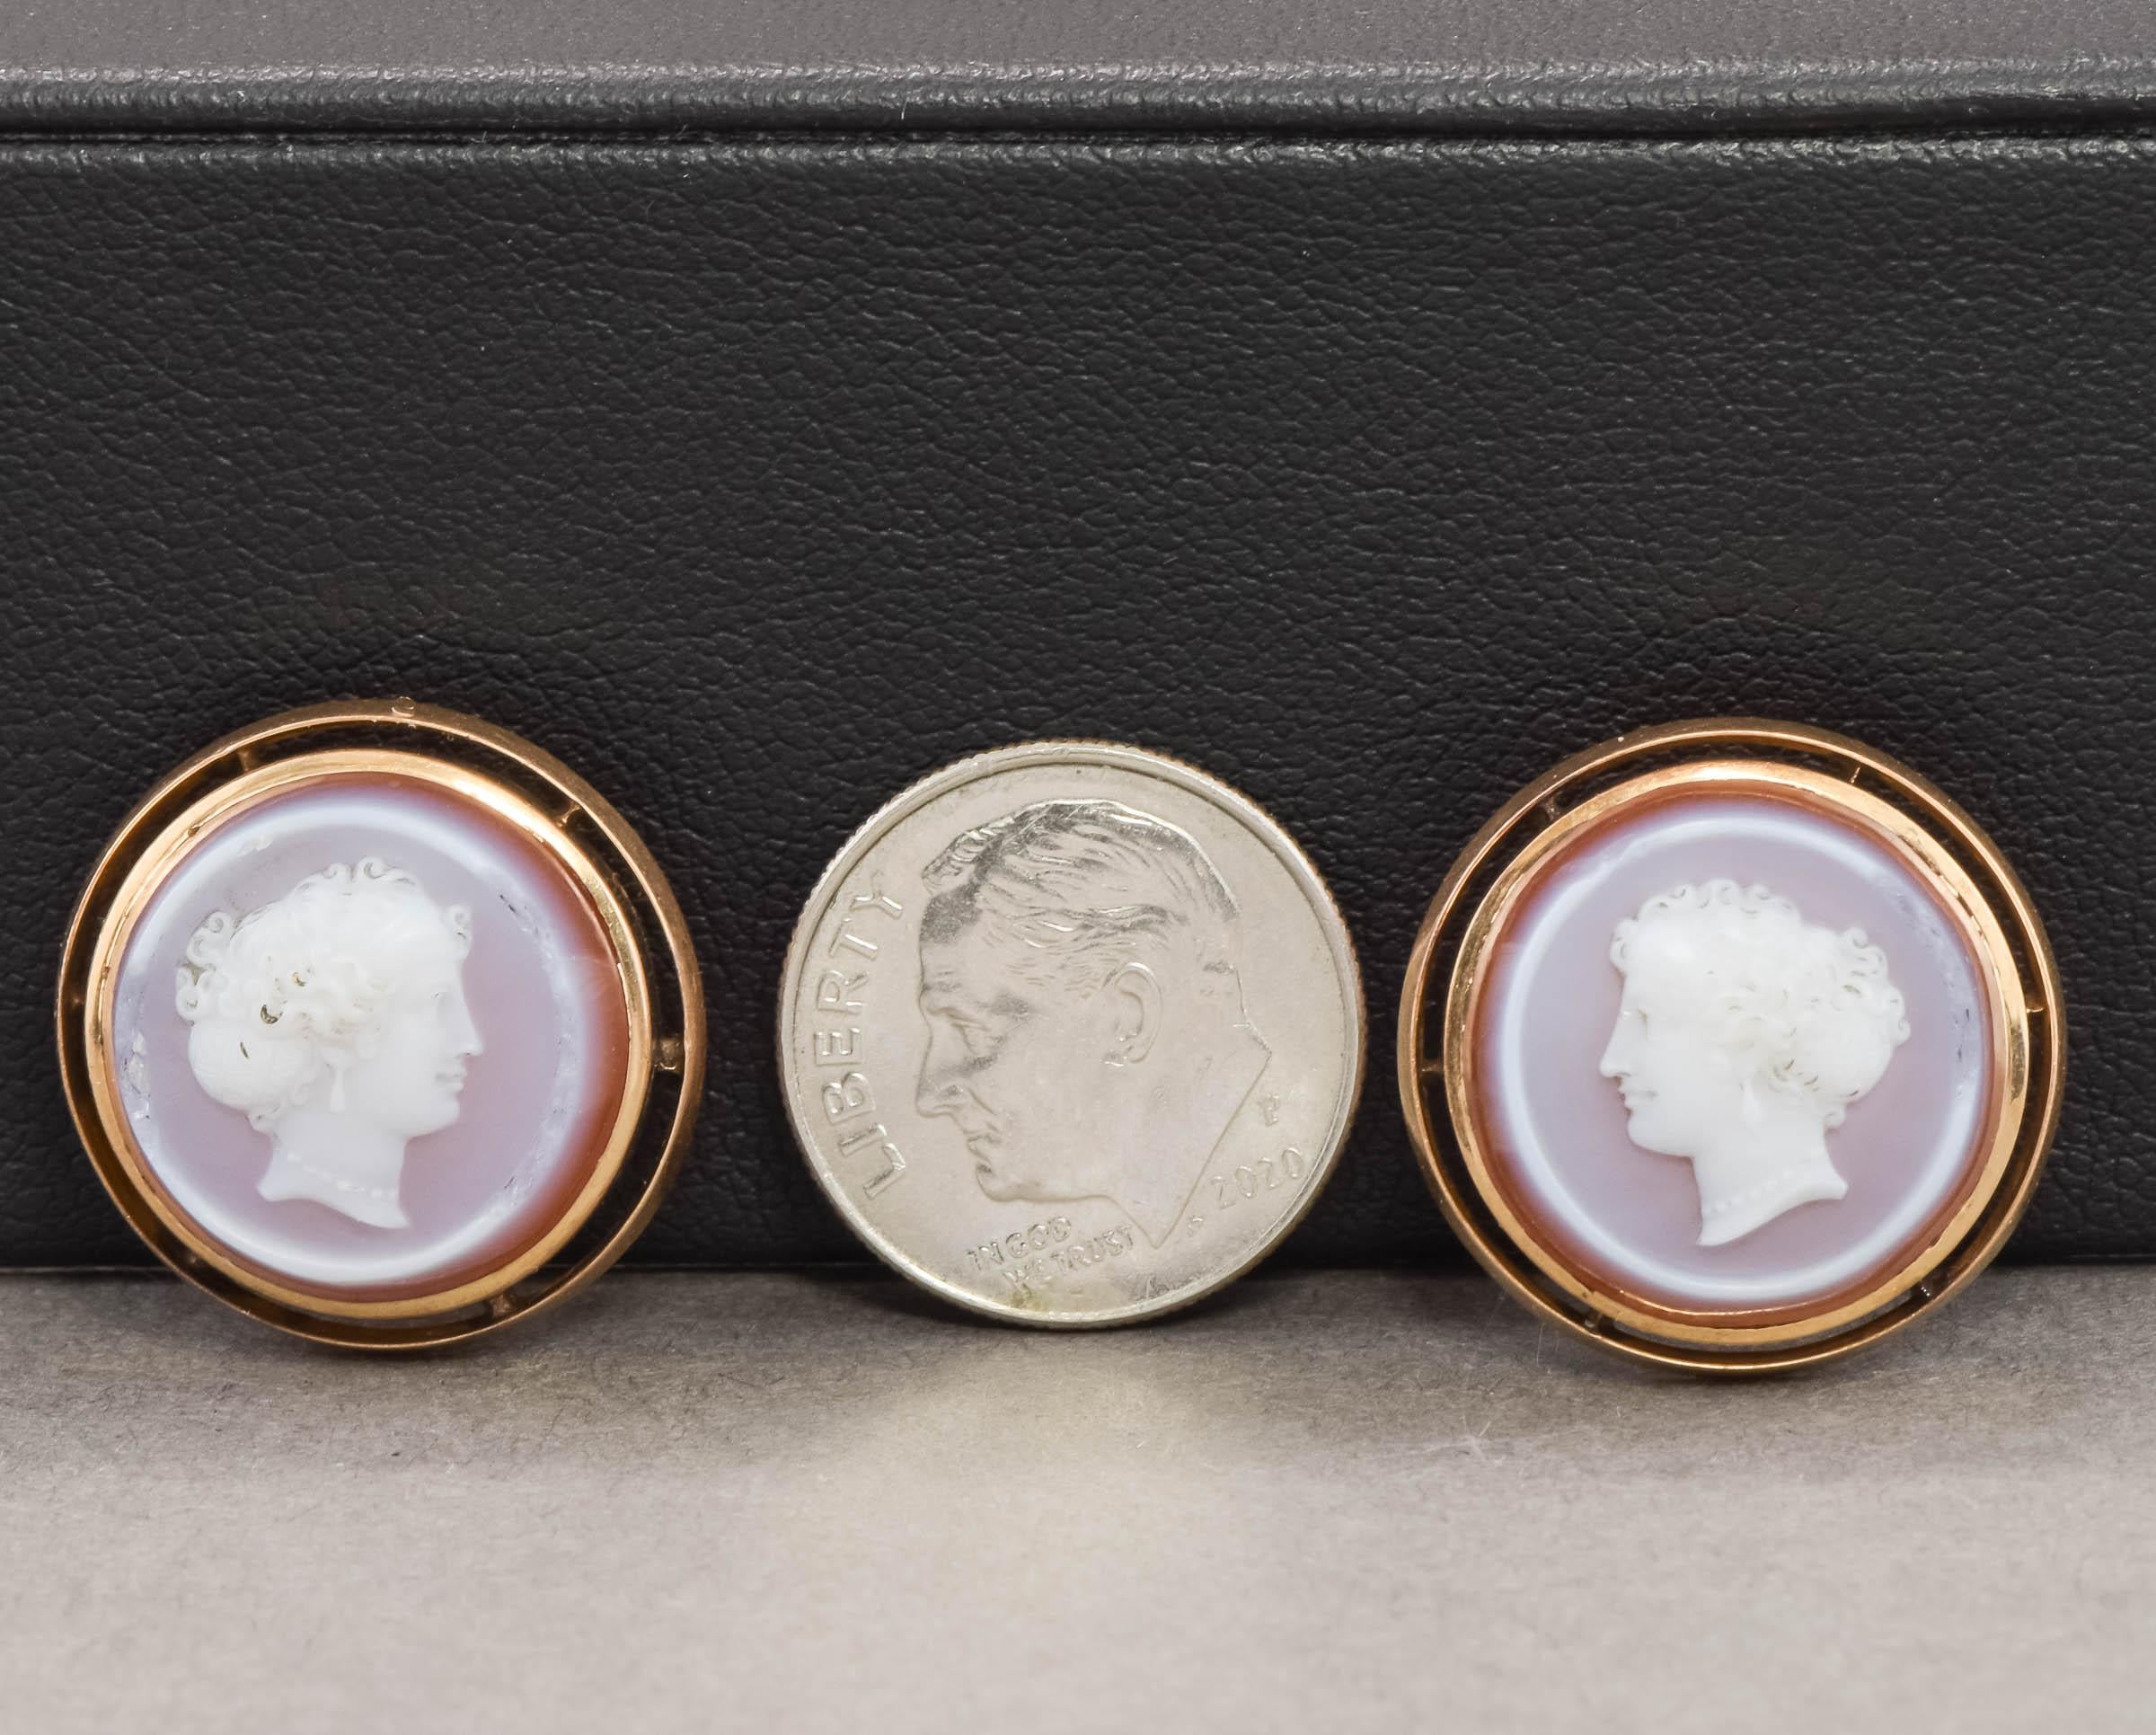 Round Cut Antique Banded Agate Cameo Cufflinks or Buttons in 14K Gold with Monogram For Sale